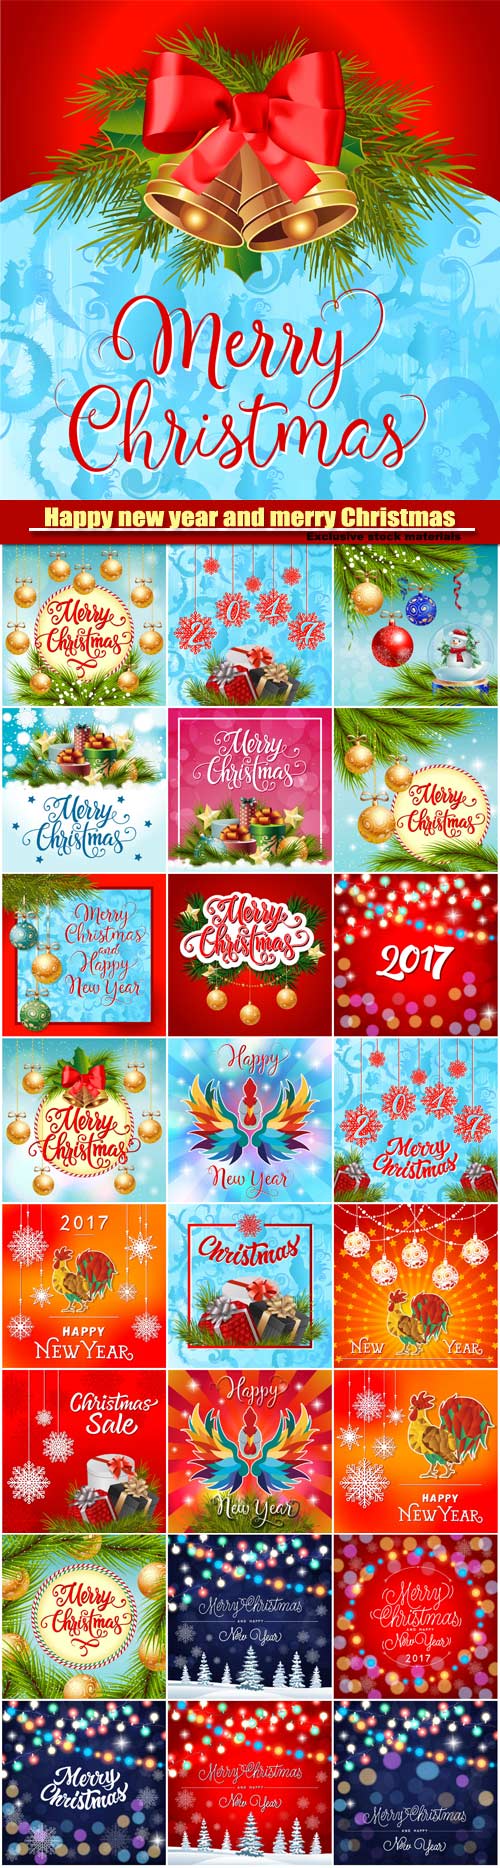 Merry Christmas and Happy New Year, decorations,Christmas balls, present boxes with bow, stars